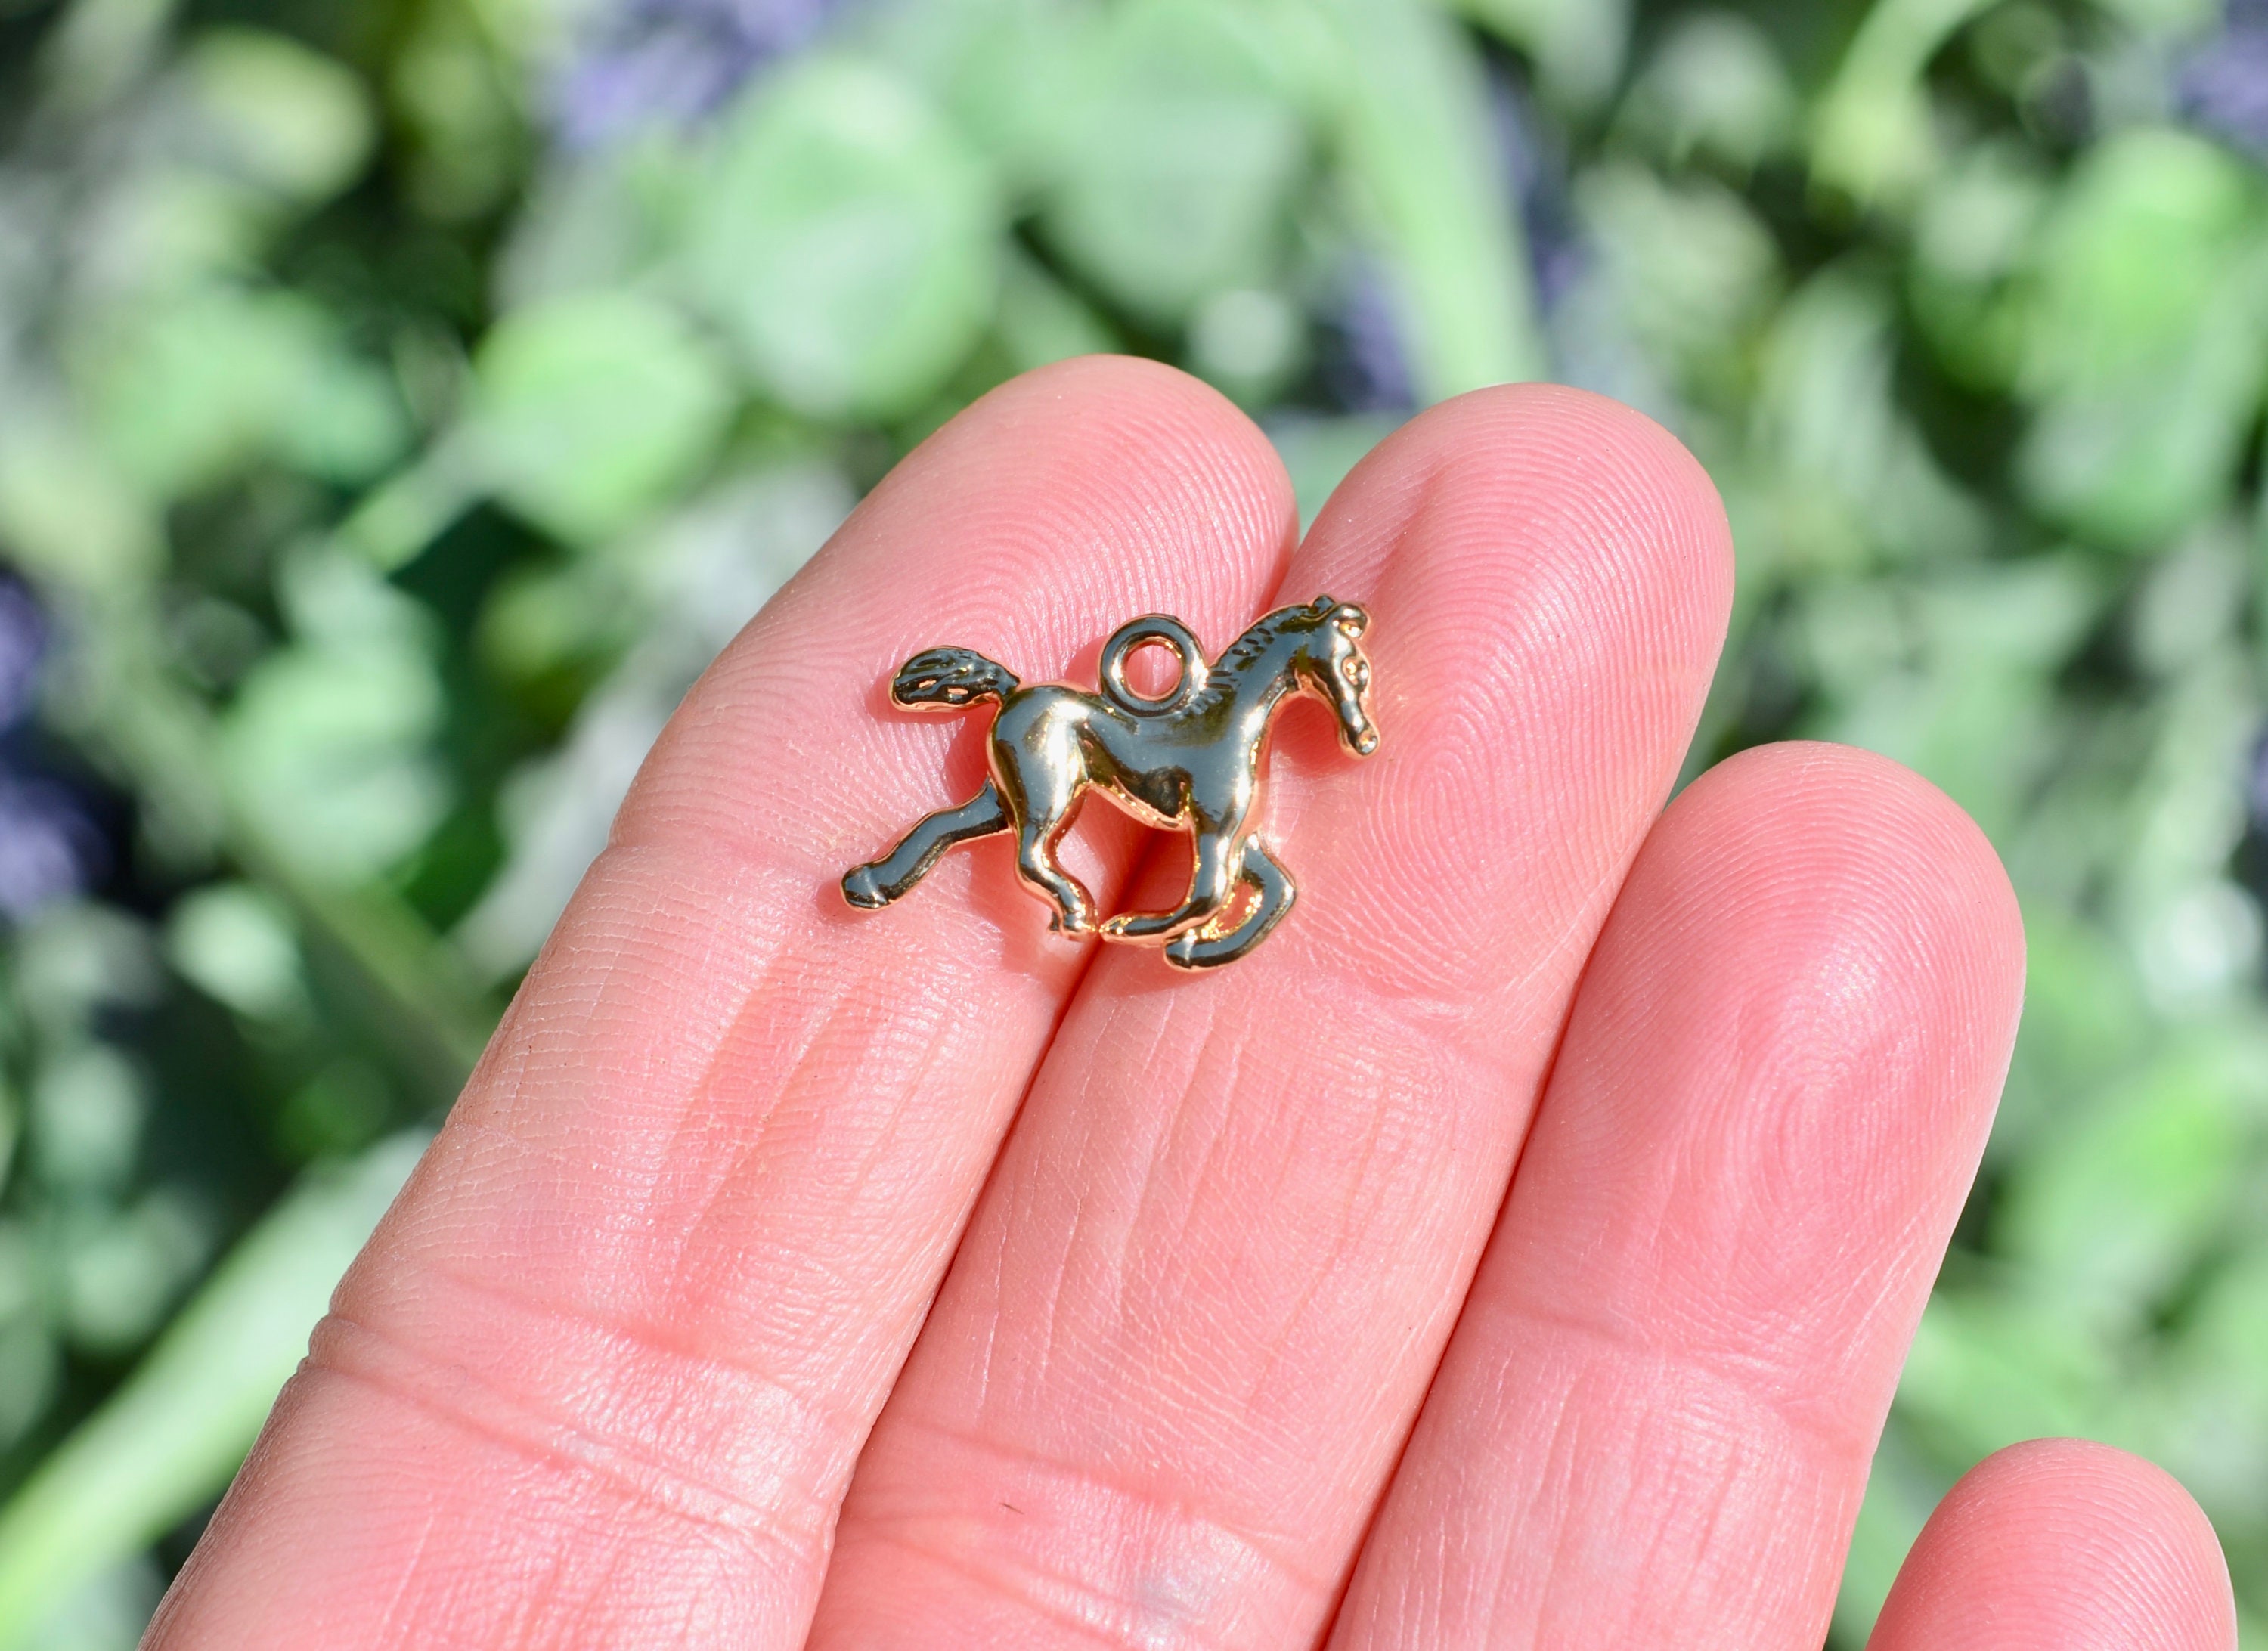 Tiny Gold Horse Charm - Susan Campbell Jewelry